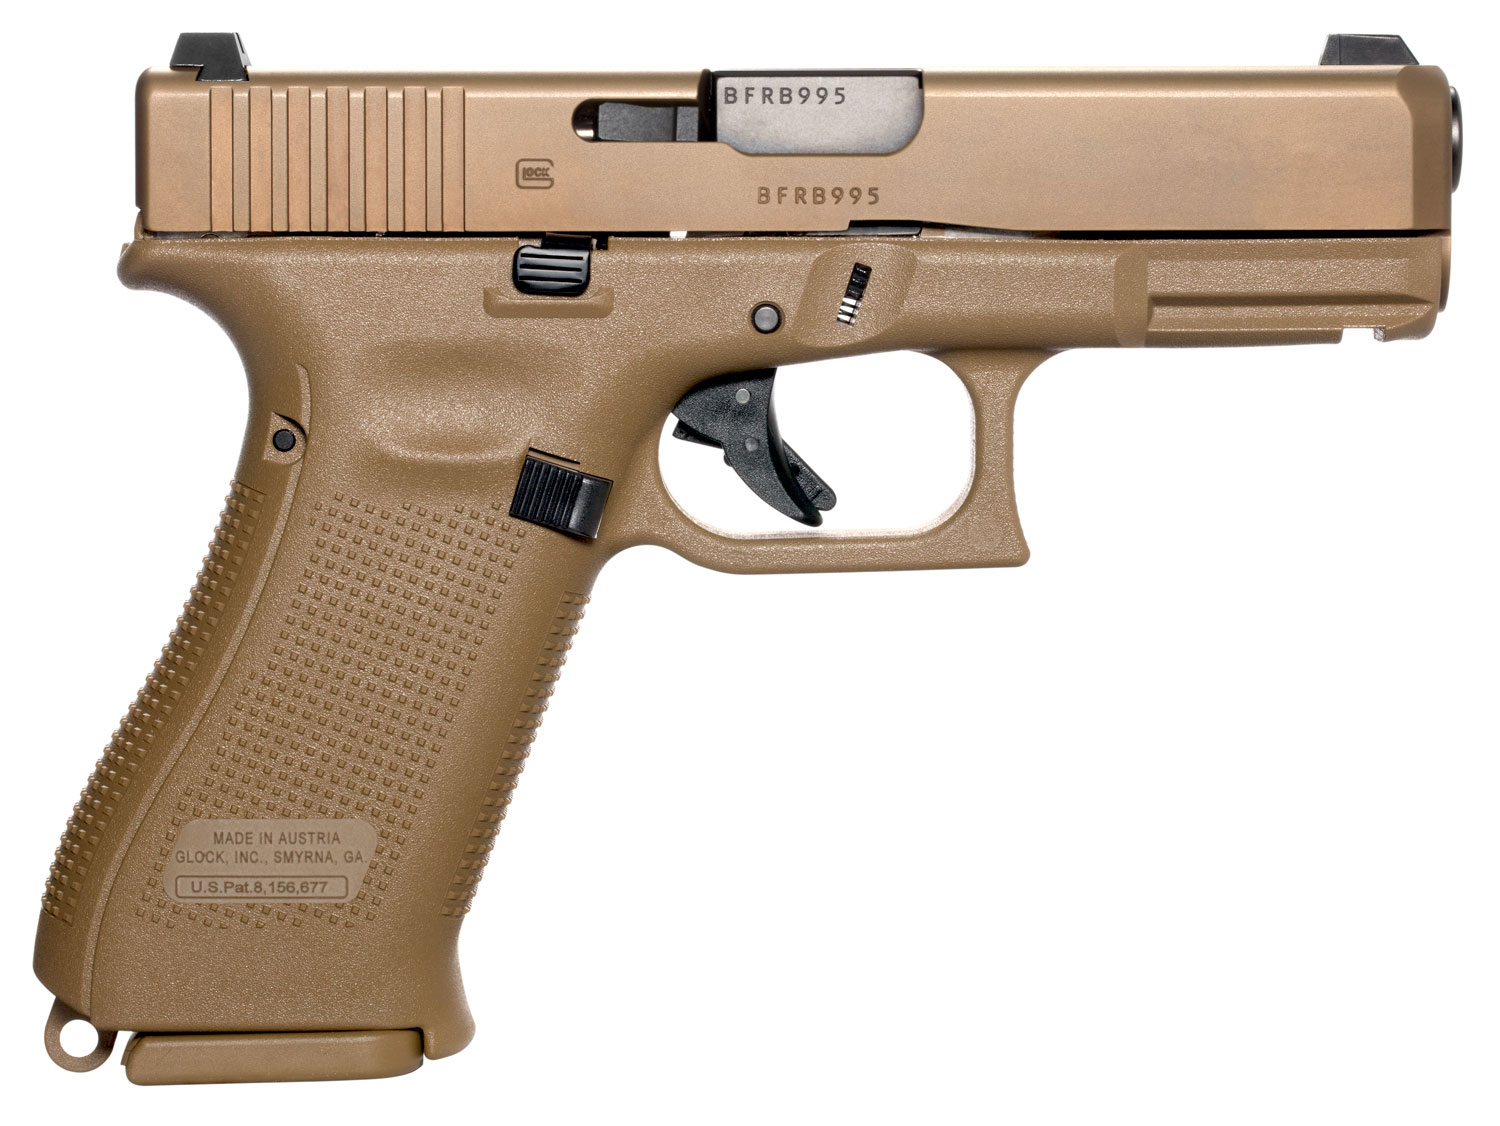 Glock UX1950703 G19X Crossover 9mm Luger 4.02